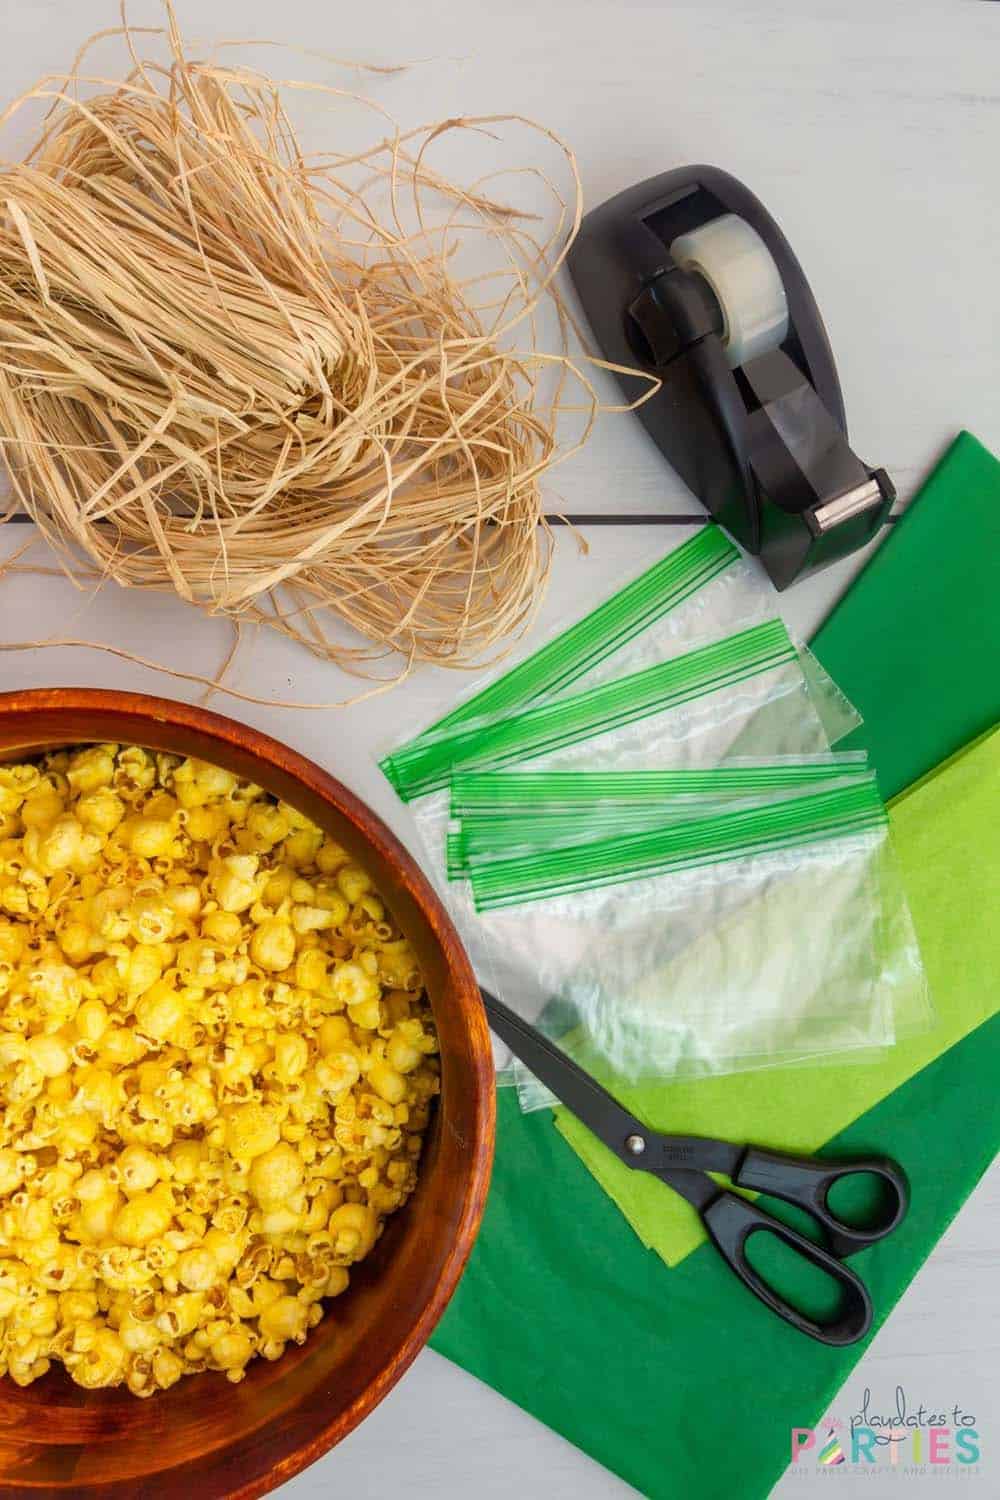 Supplies needed to make popcorn corn on the cob favor bags.